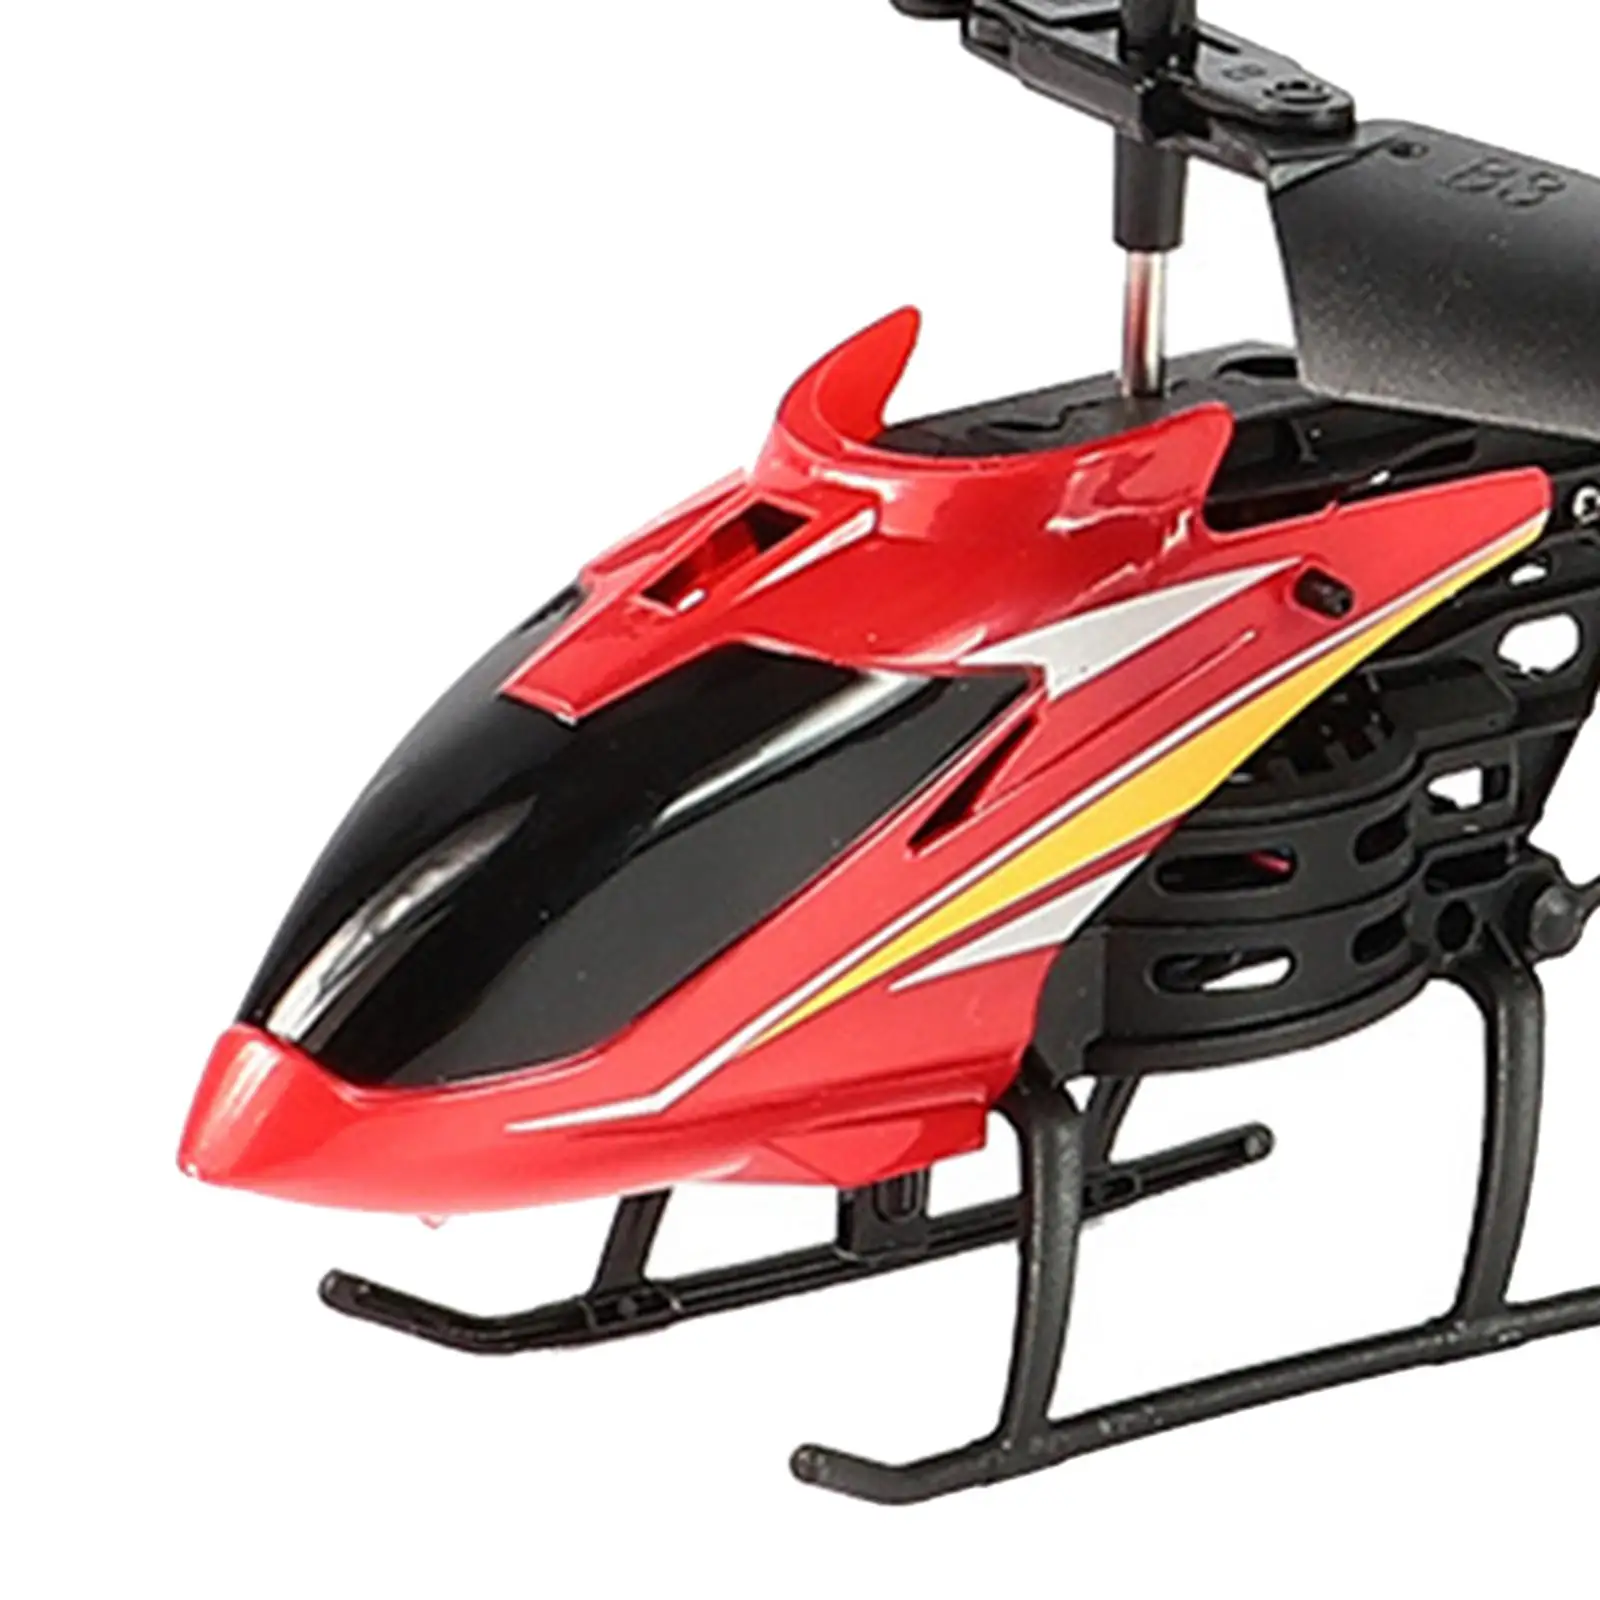 Remote Control Helicopter Indoor to Fly and Gyro Aircraft for Beginners Boys